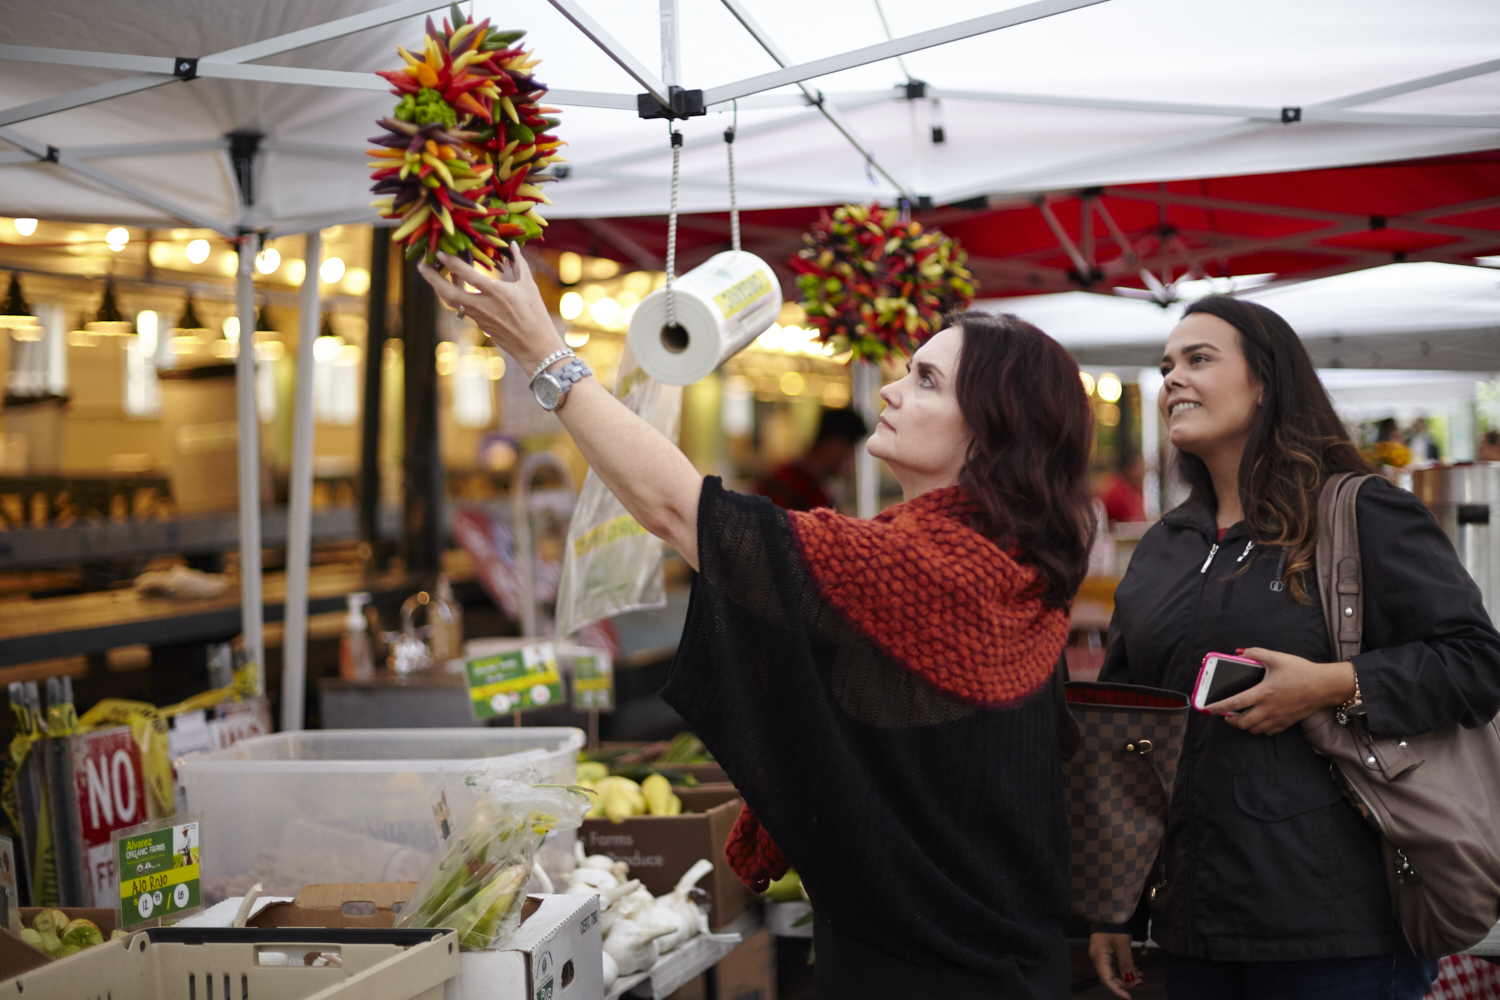 Every Wednesday, Seattleites visit Pike Place to commune with friends, visit local farmers, and eat delectable local fare